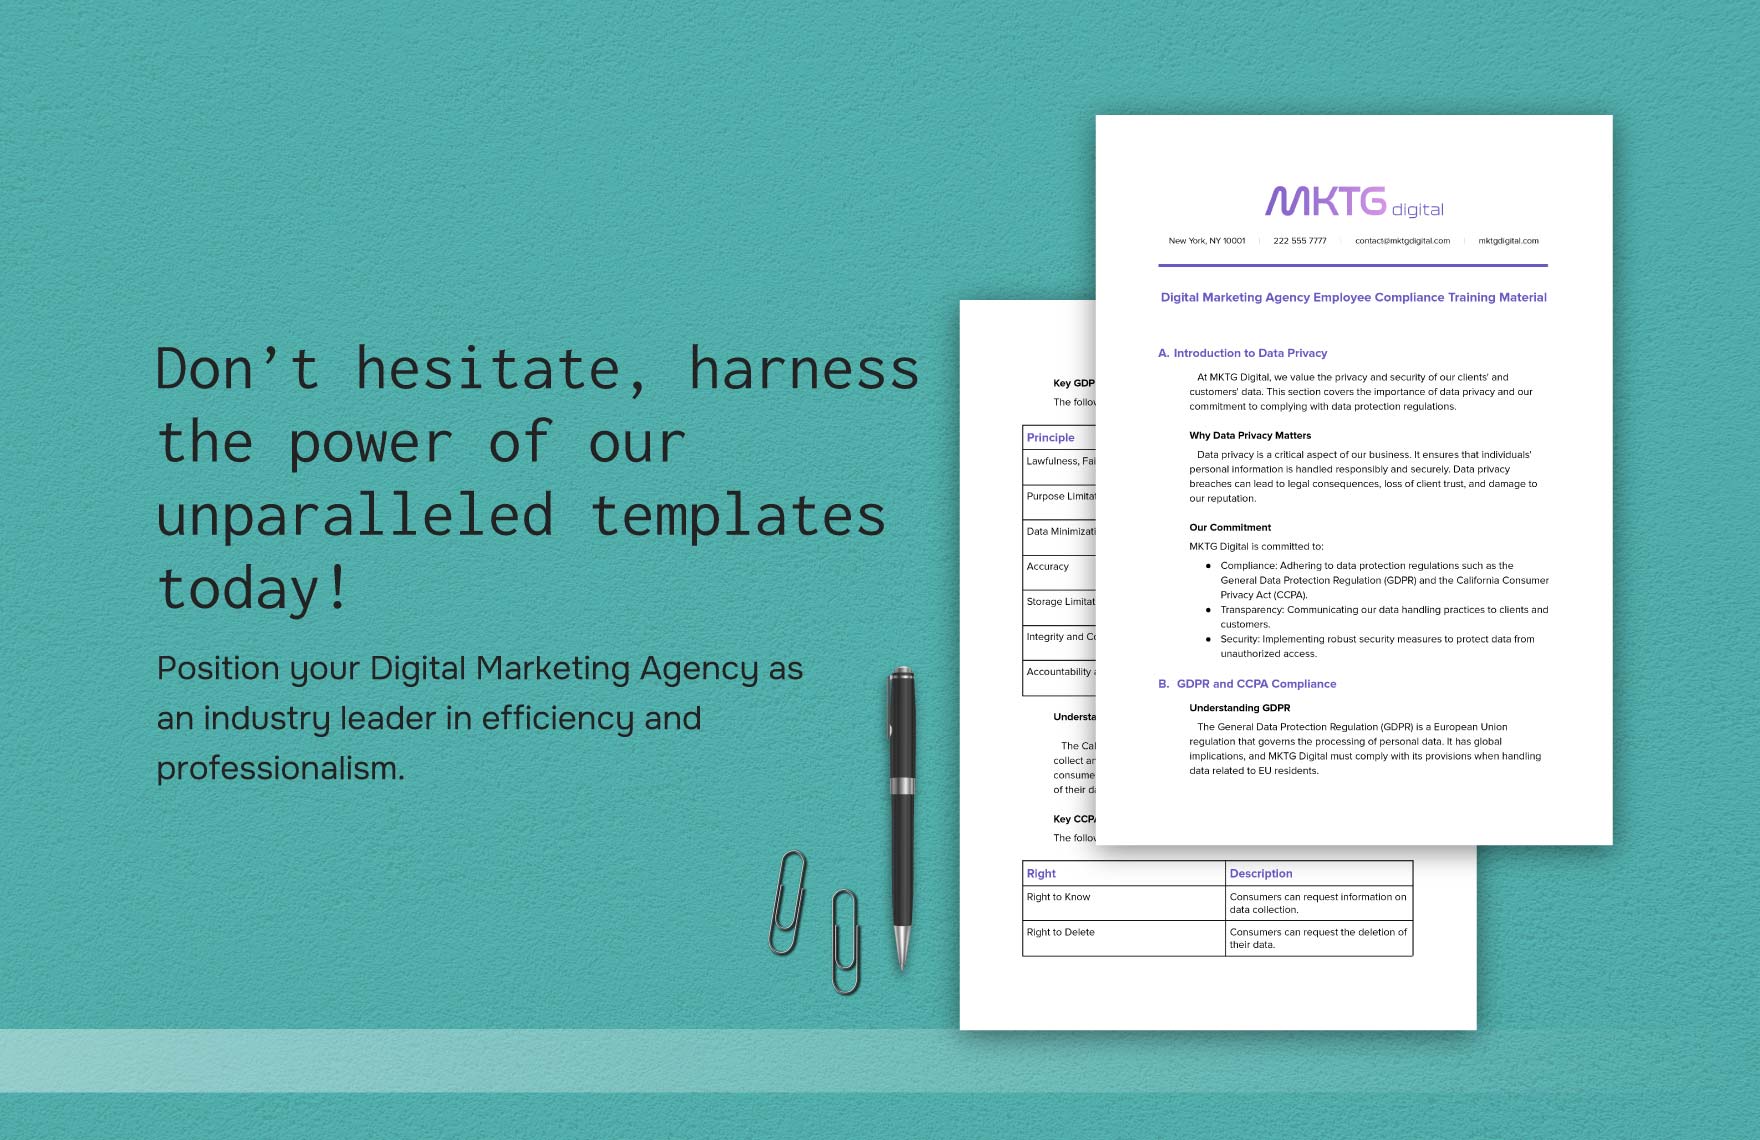 Digital Marketing Agency Employee Compliance Training Material Template